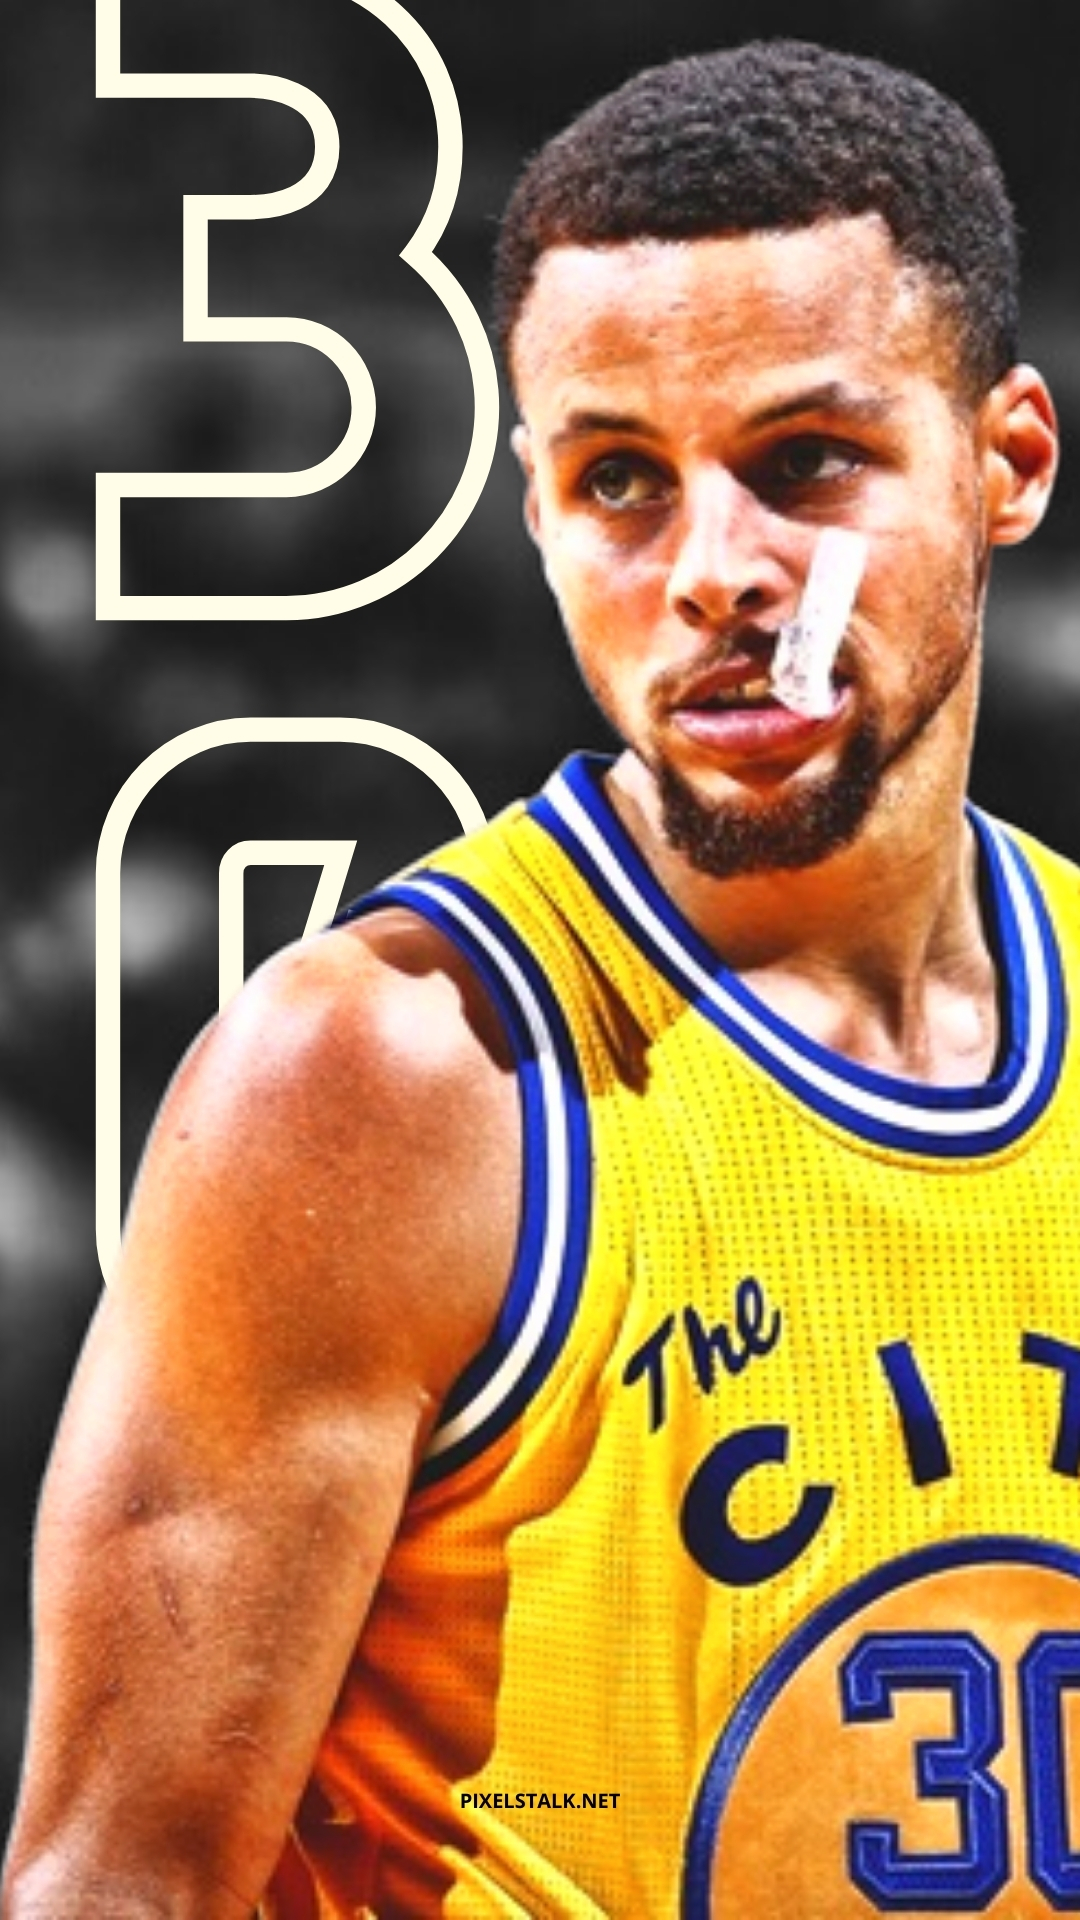 Stephen Curry On Fire Wallpaper 61 images